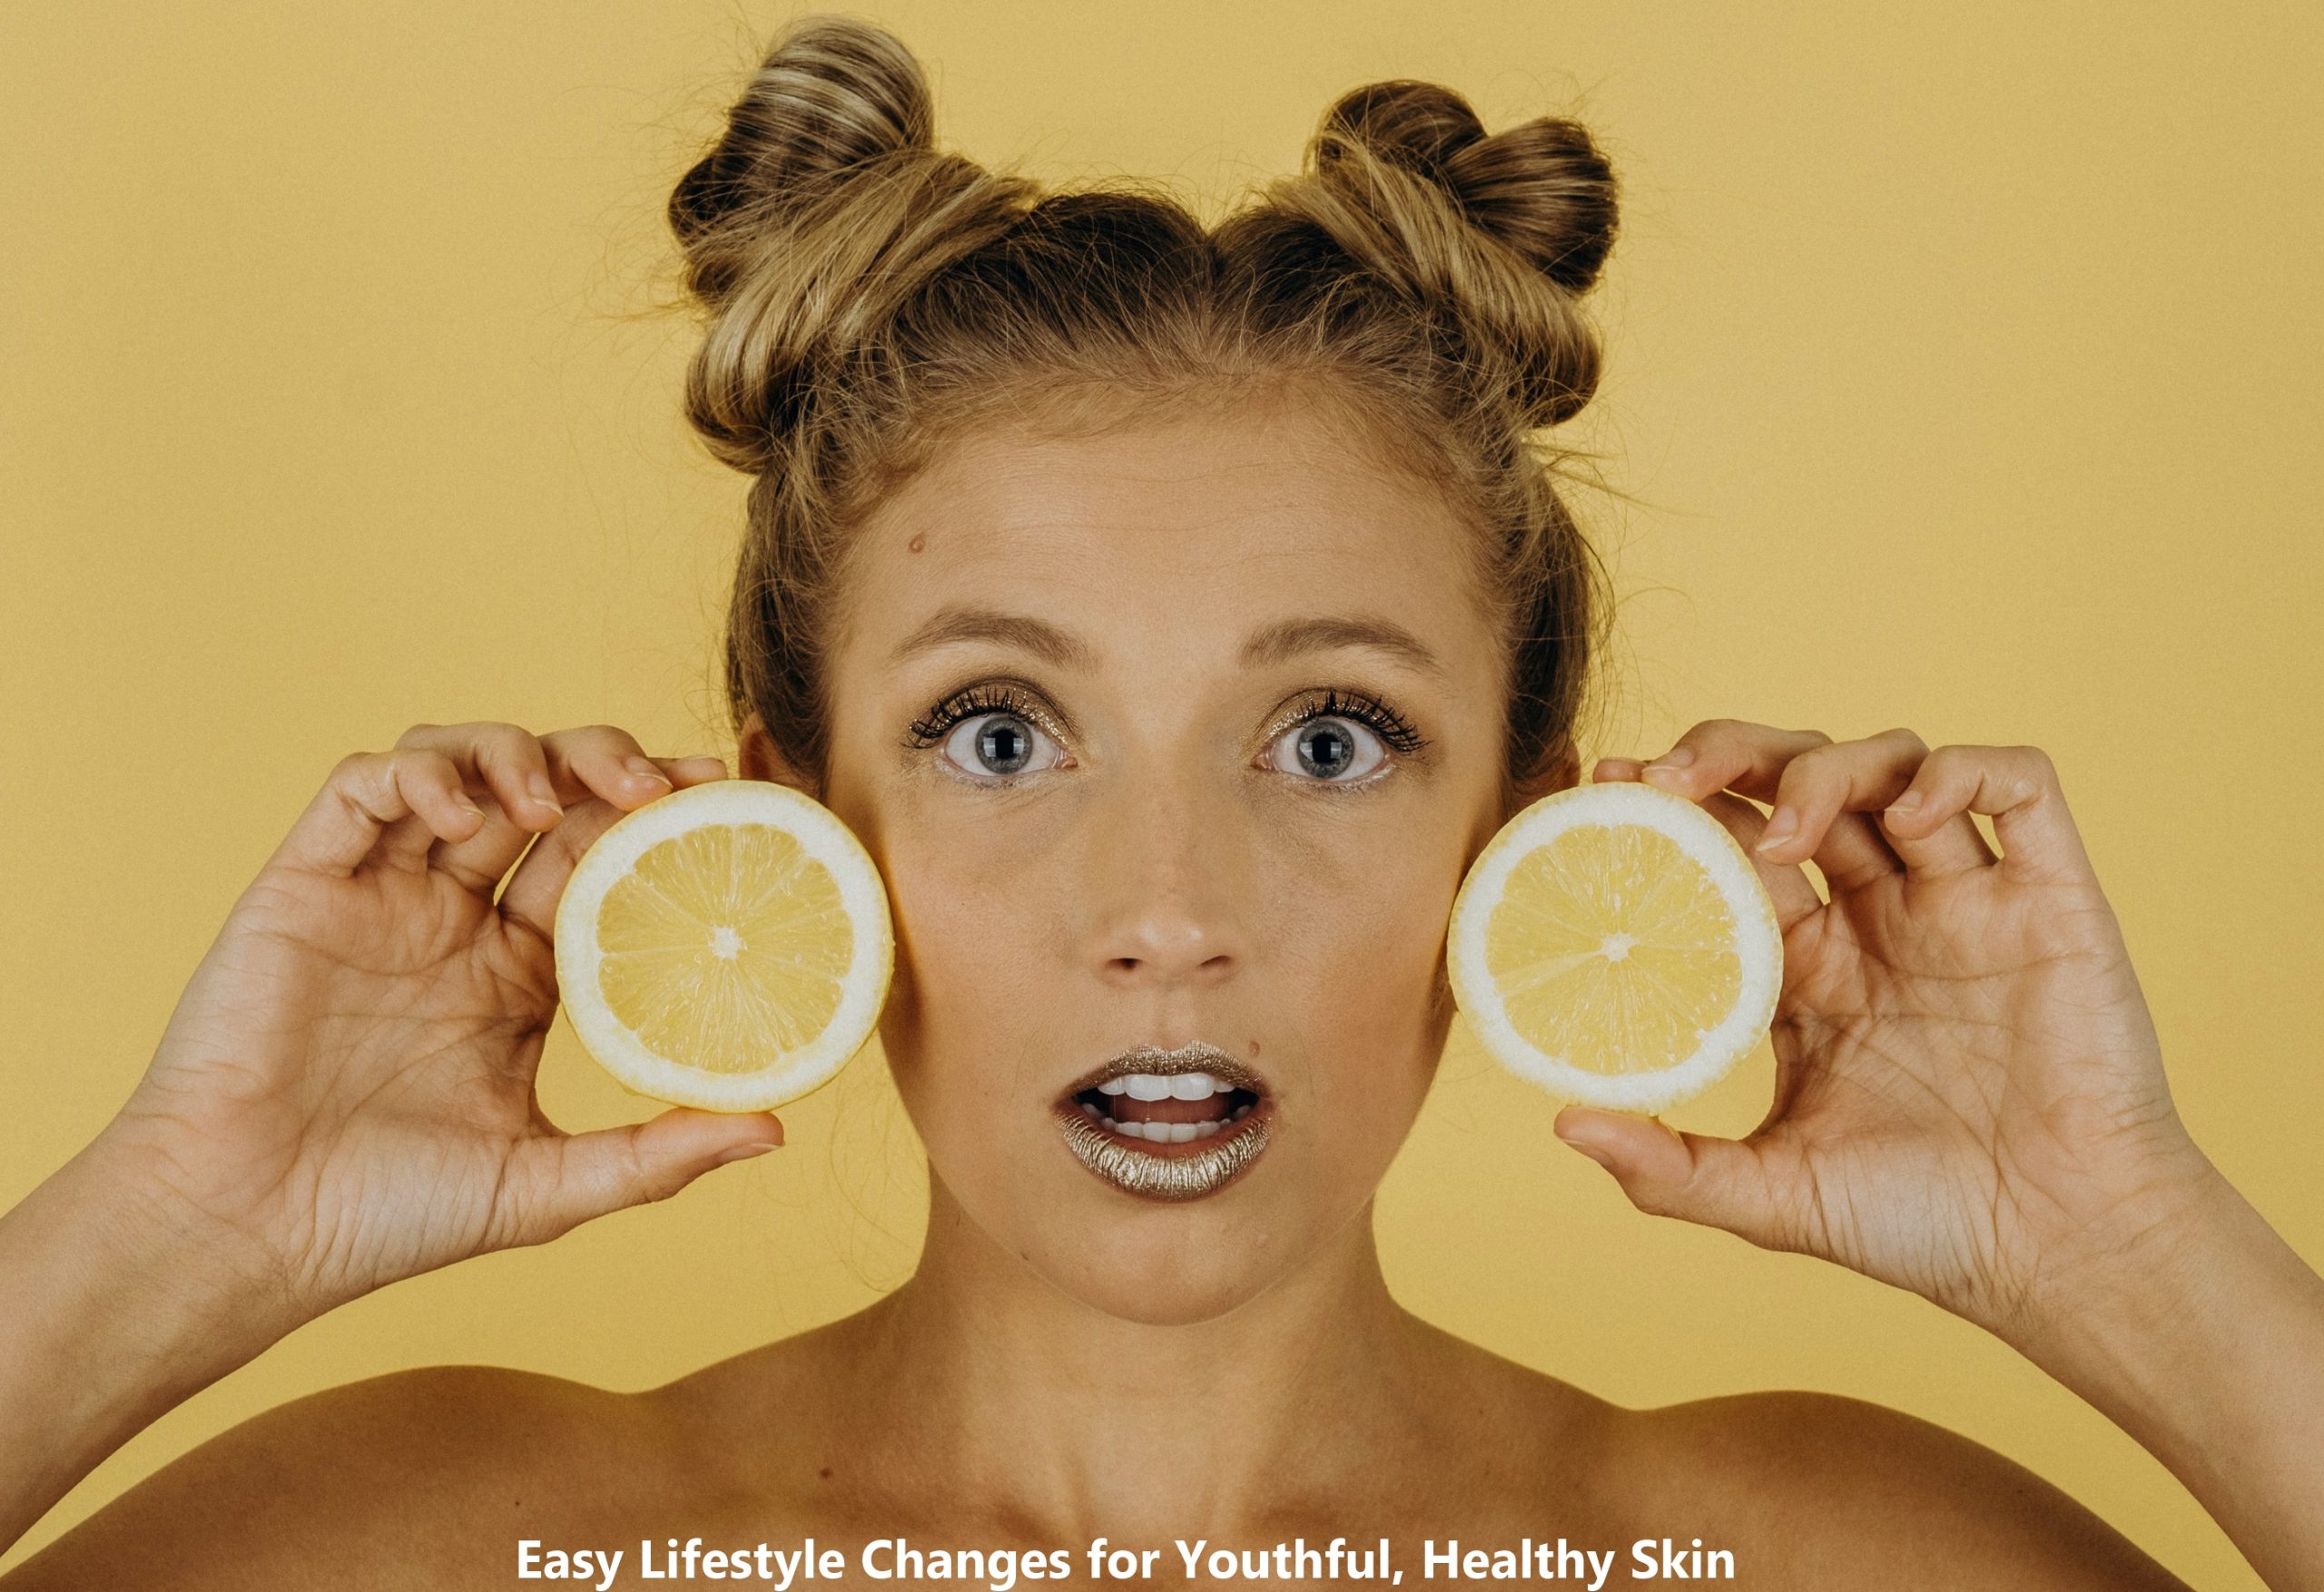 12 Easy Lifestyle Changes for Youthful, Healthy Skin